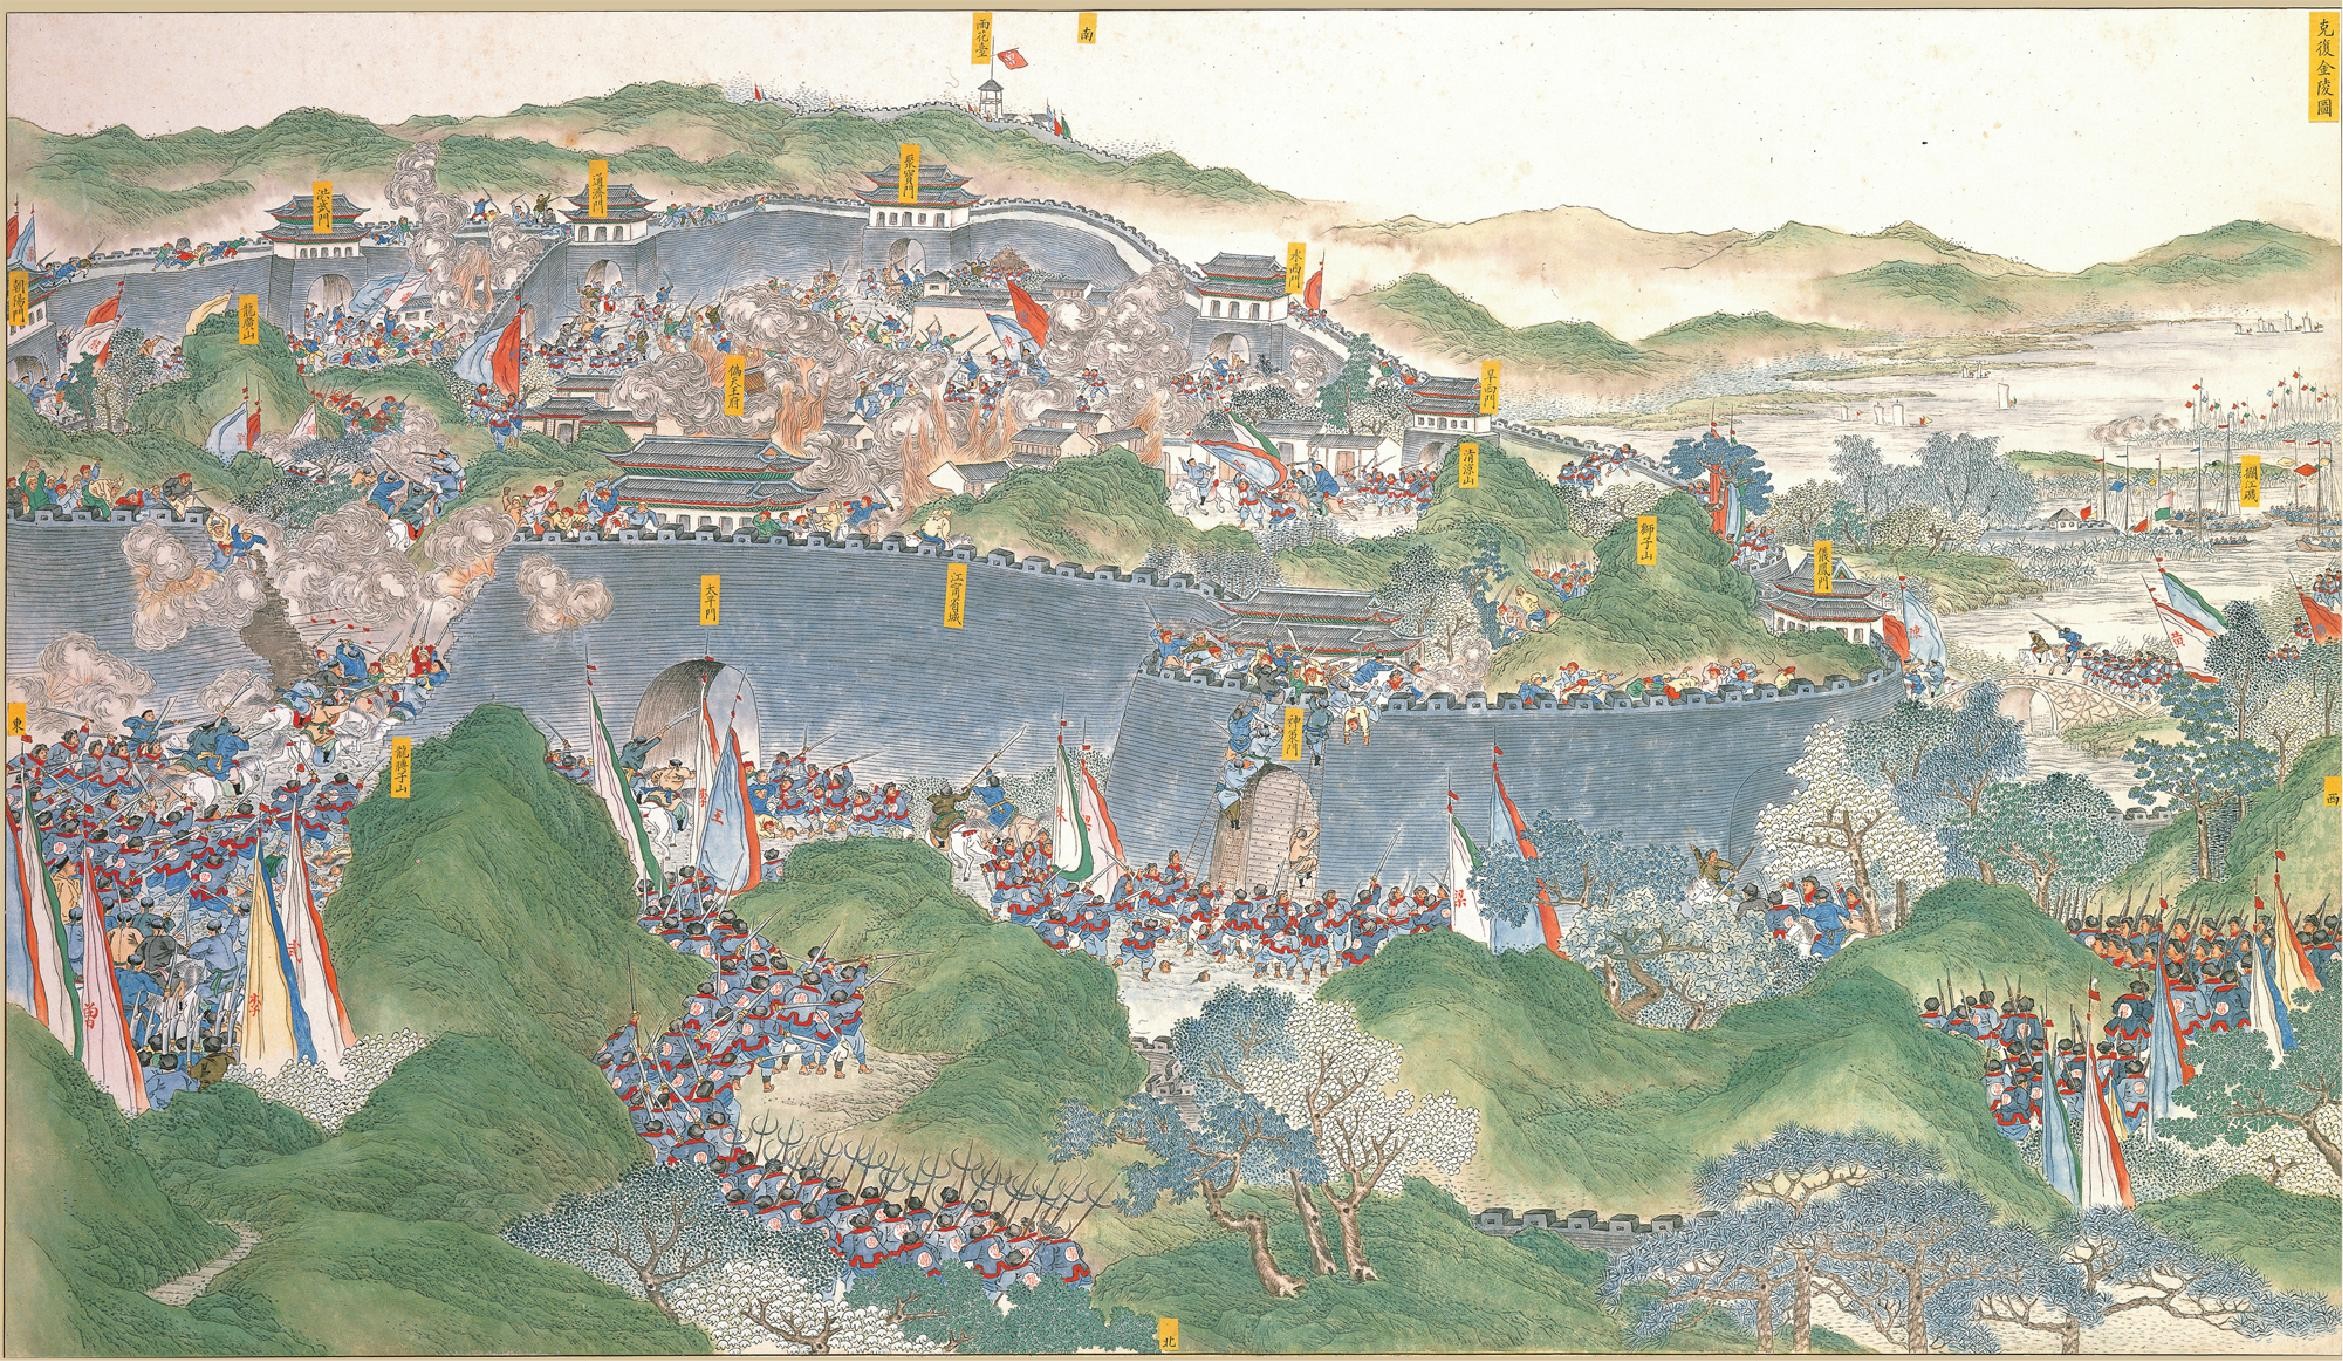 A battle scene during the Taiping Rebellion, from 1850-1864.